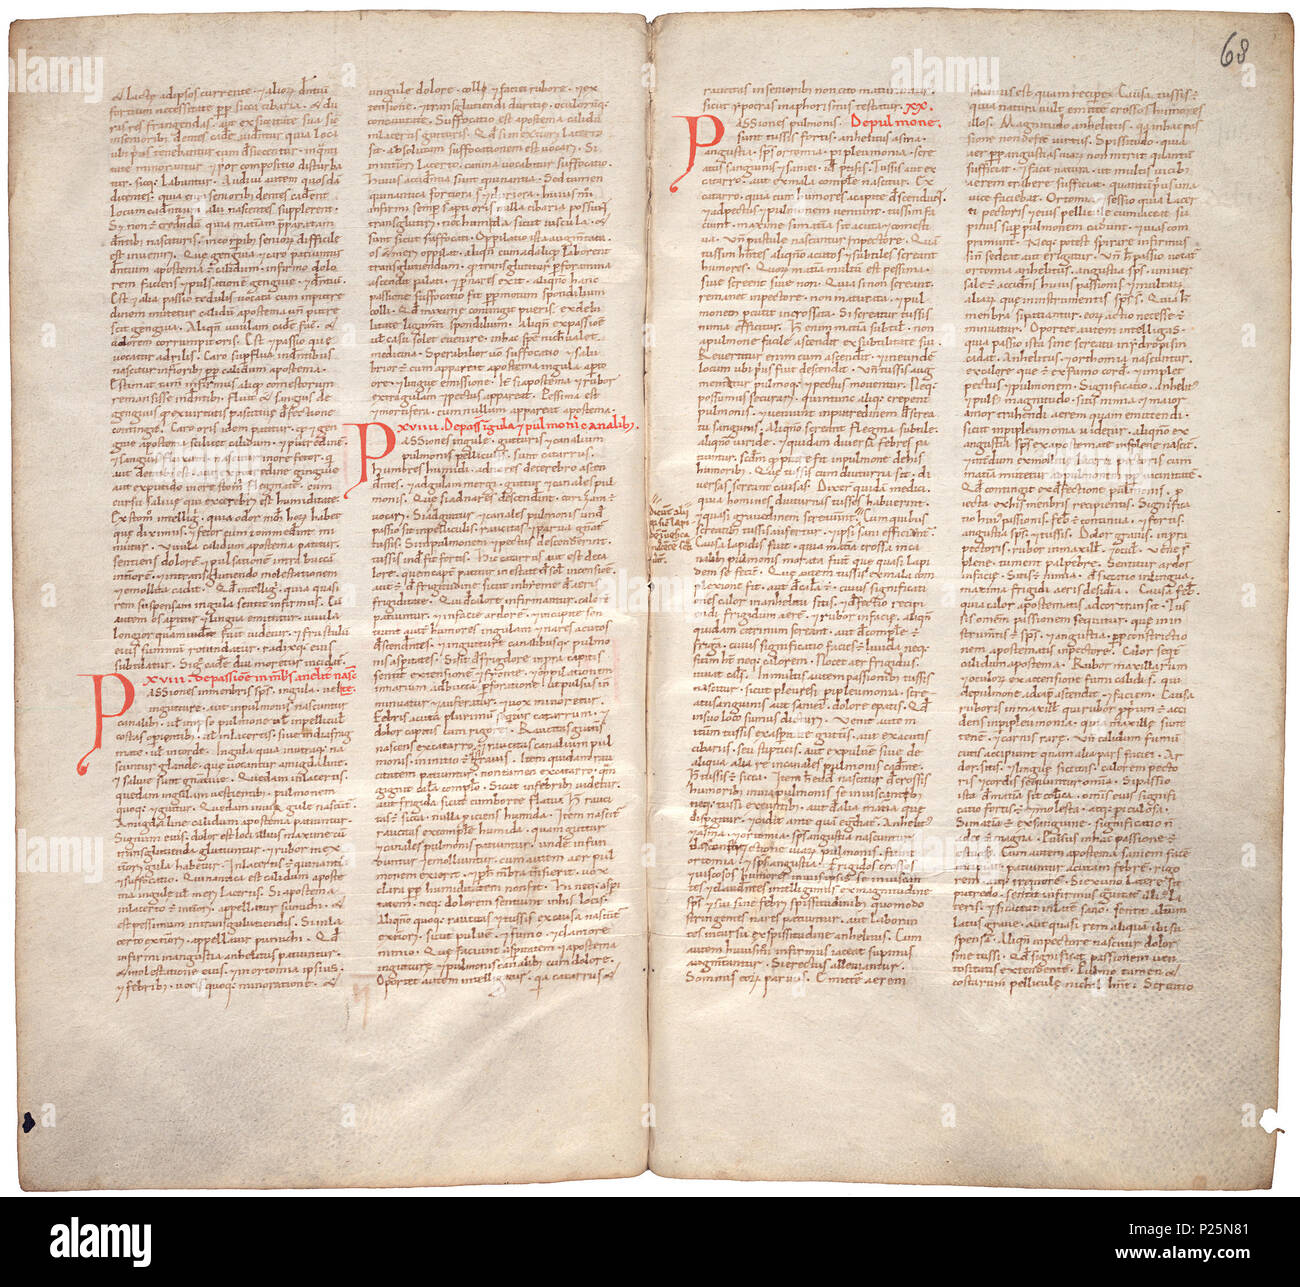 . Pantegni pars prima theorica (lib. I-X) - folios 067v (left) and 068r (right)  .  Lefthand side folio 067v; righthand side folio 068r from an 11th century copy of the Liber pantegni. This is the earliest known copy (prior to 1086) of the Liber pantegni, made at Monte Cassino under the supervision of Constantine the African. It is dedicated to Abbot Desiderius of Monte Cassino (1027-1087), before he became Pope Victor III. Read backgroud information in Dutch and in English. . Constantine the African (ca. 1010-1098/9) 176 Liber pantegni - KB 73 J 6 - folios 067v (left) and 068r (right) Stock Photo